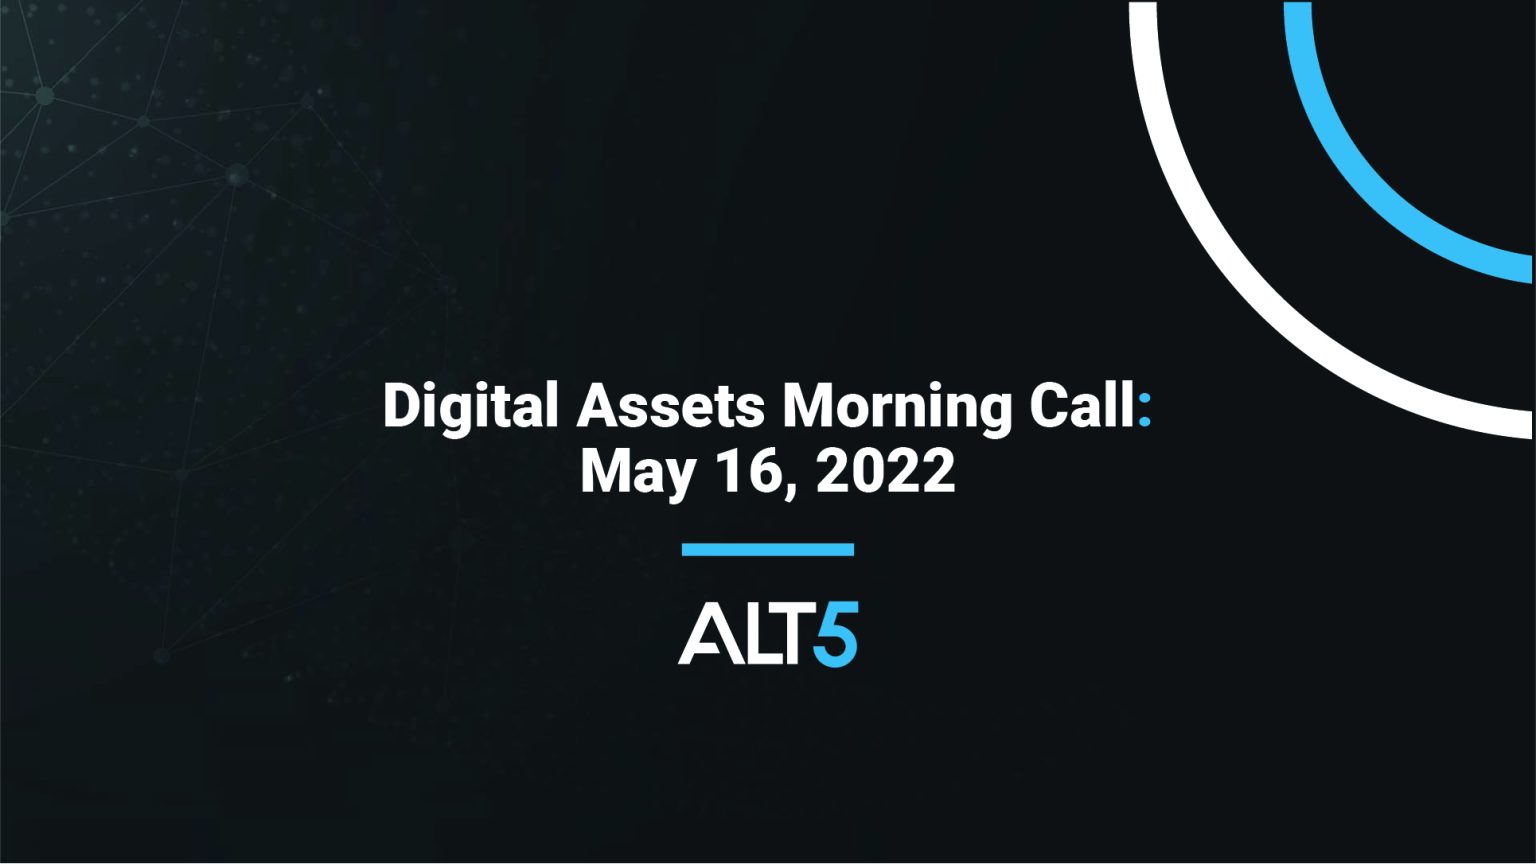 Digital Assets Morning Call: May 16 2022 - Crypto consolidates after the fall